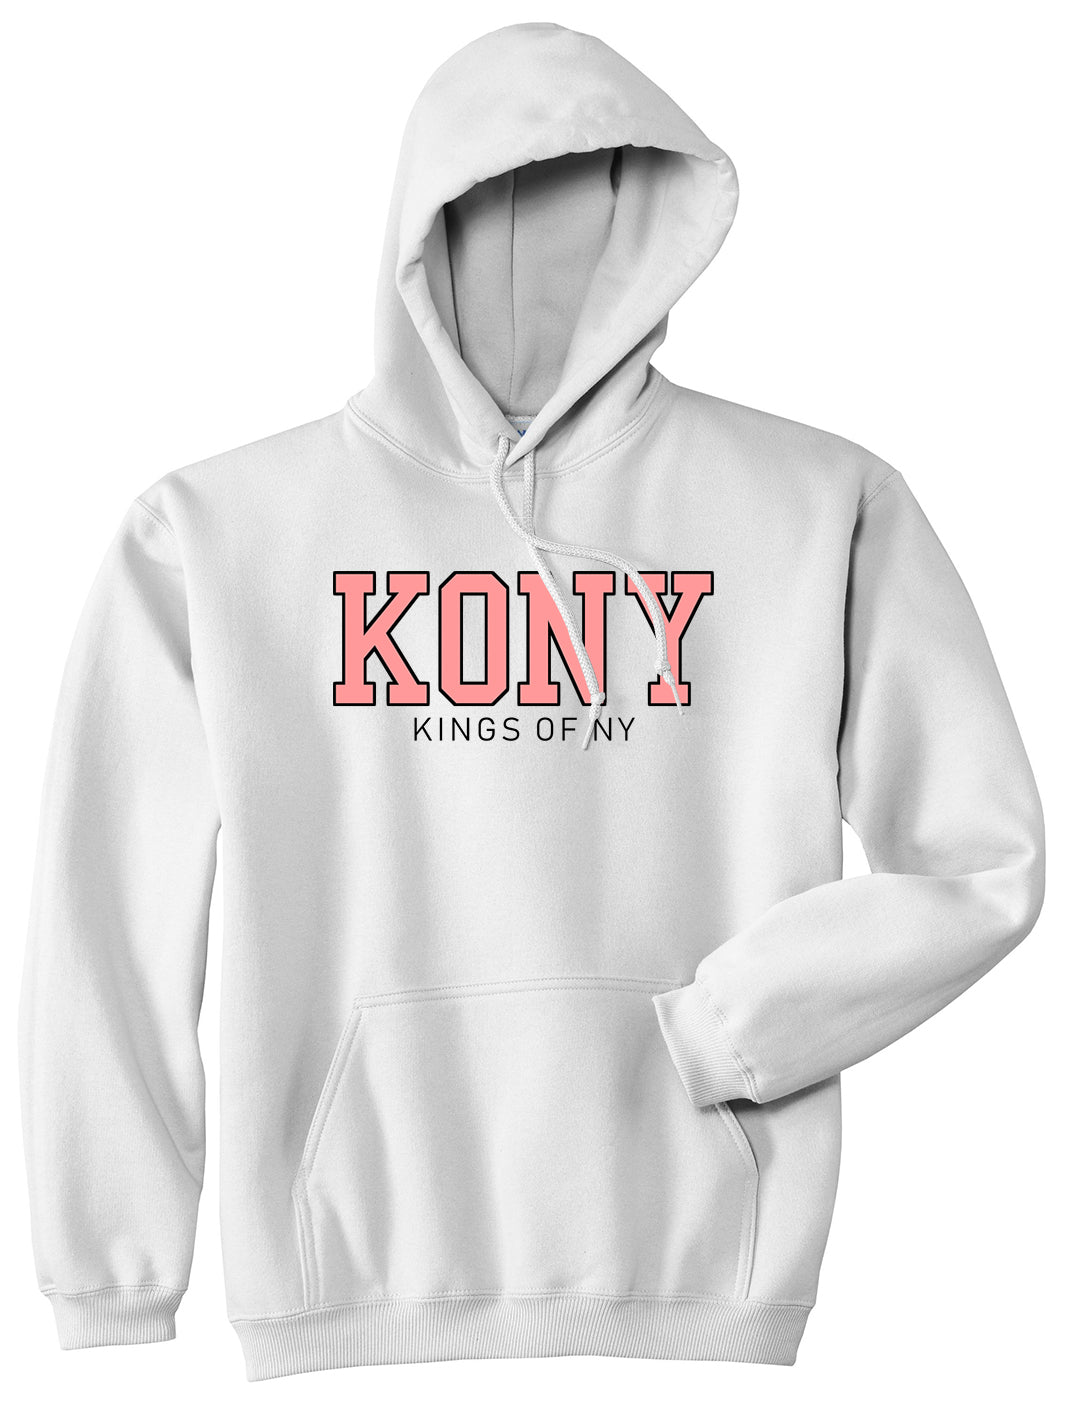 KONY College Mens Pullover Hoodie White by Kings Of NY